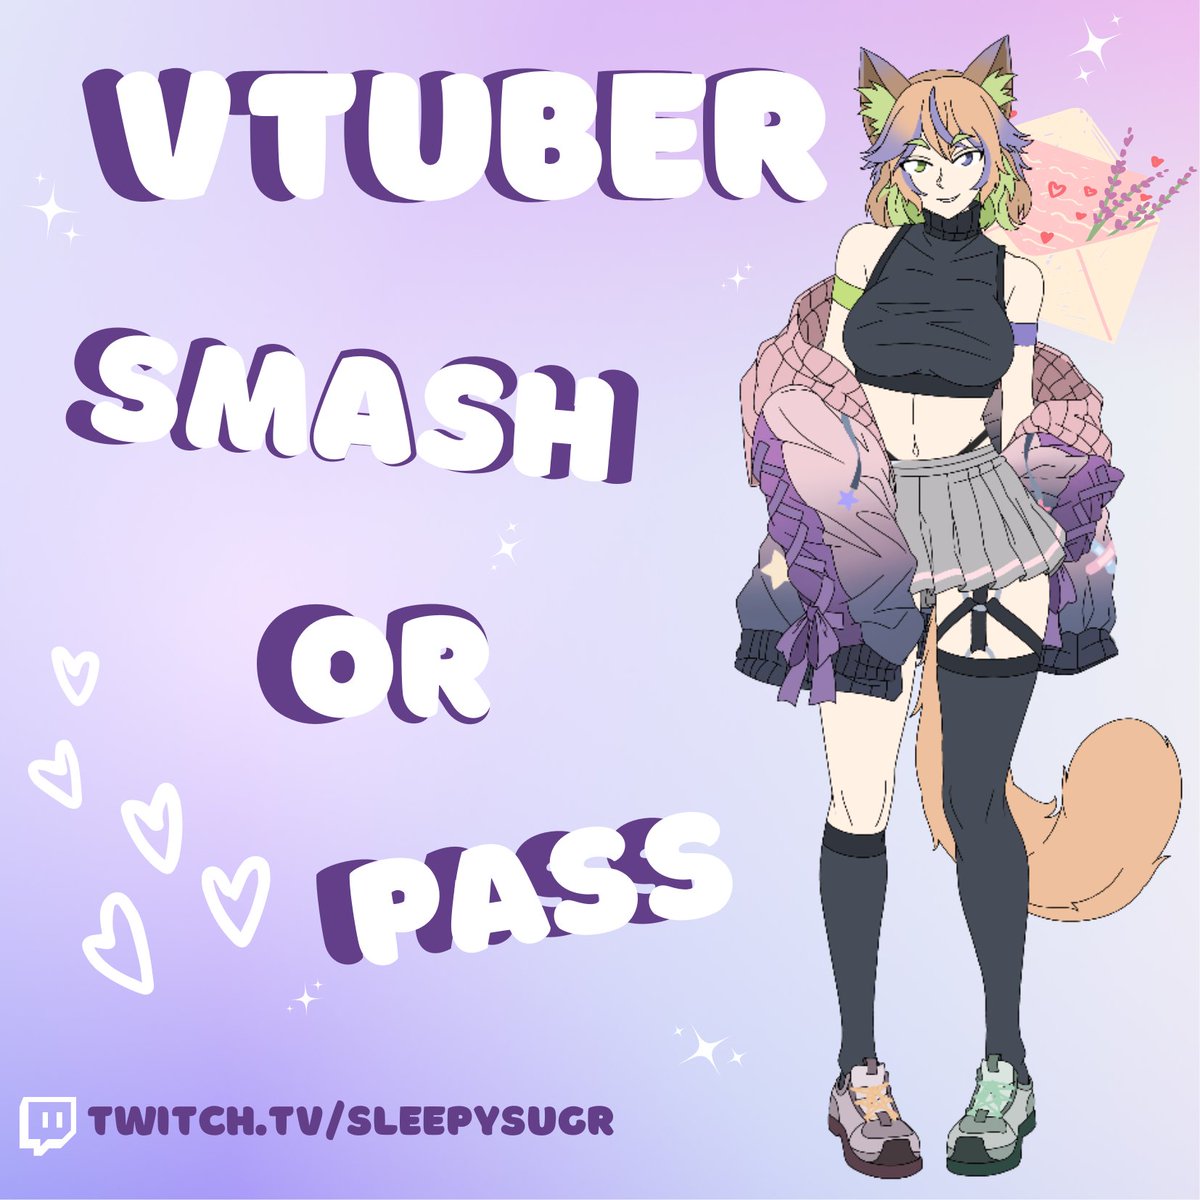 ❗CALLING ALL VTUBERS❗

Drop your (sfw) PNGS!!! I'll be doing 'Smash or Pass' on stream- Friday, Aug. 25th!!

Requirements:
-Must 18+
-ONLY sfw pngs!!

❤️ + 🔄 appreciated~! ( • ̀ω•́ )✧

#VTubers #VTubersEN #VtuberUprisings  #VTuberSmashOrPass #VTuberSupport #smallstreamers